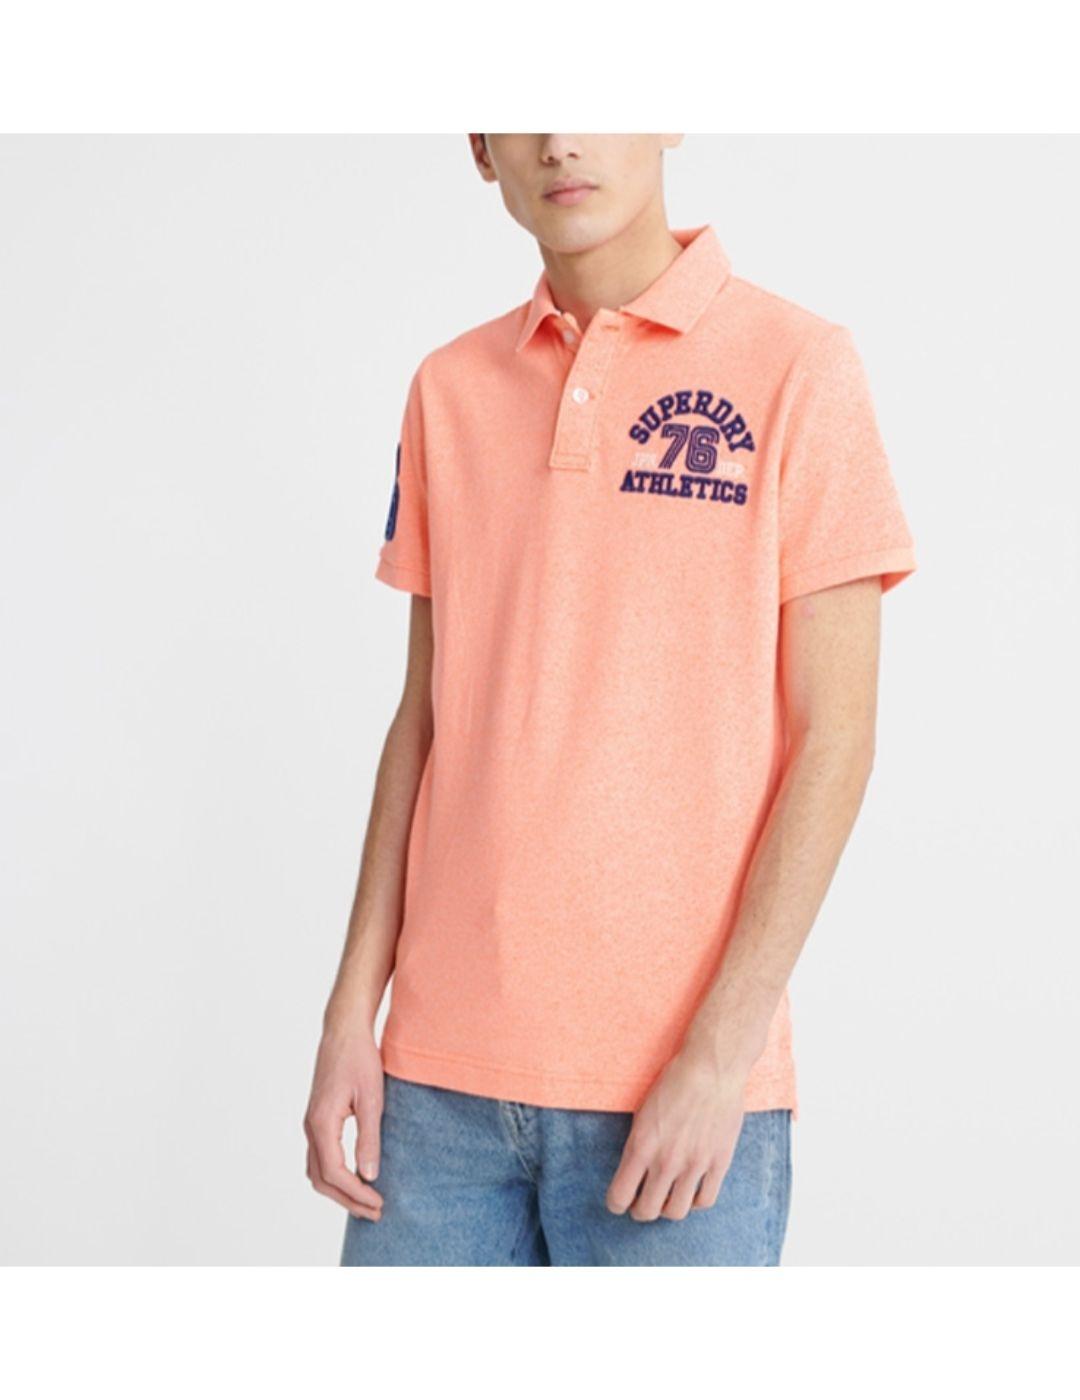 CLASSIC SUPERSTATE S/S POLO-W